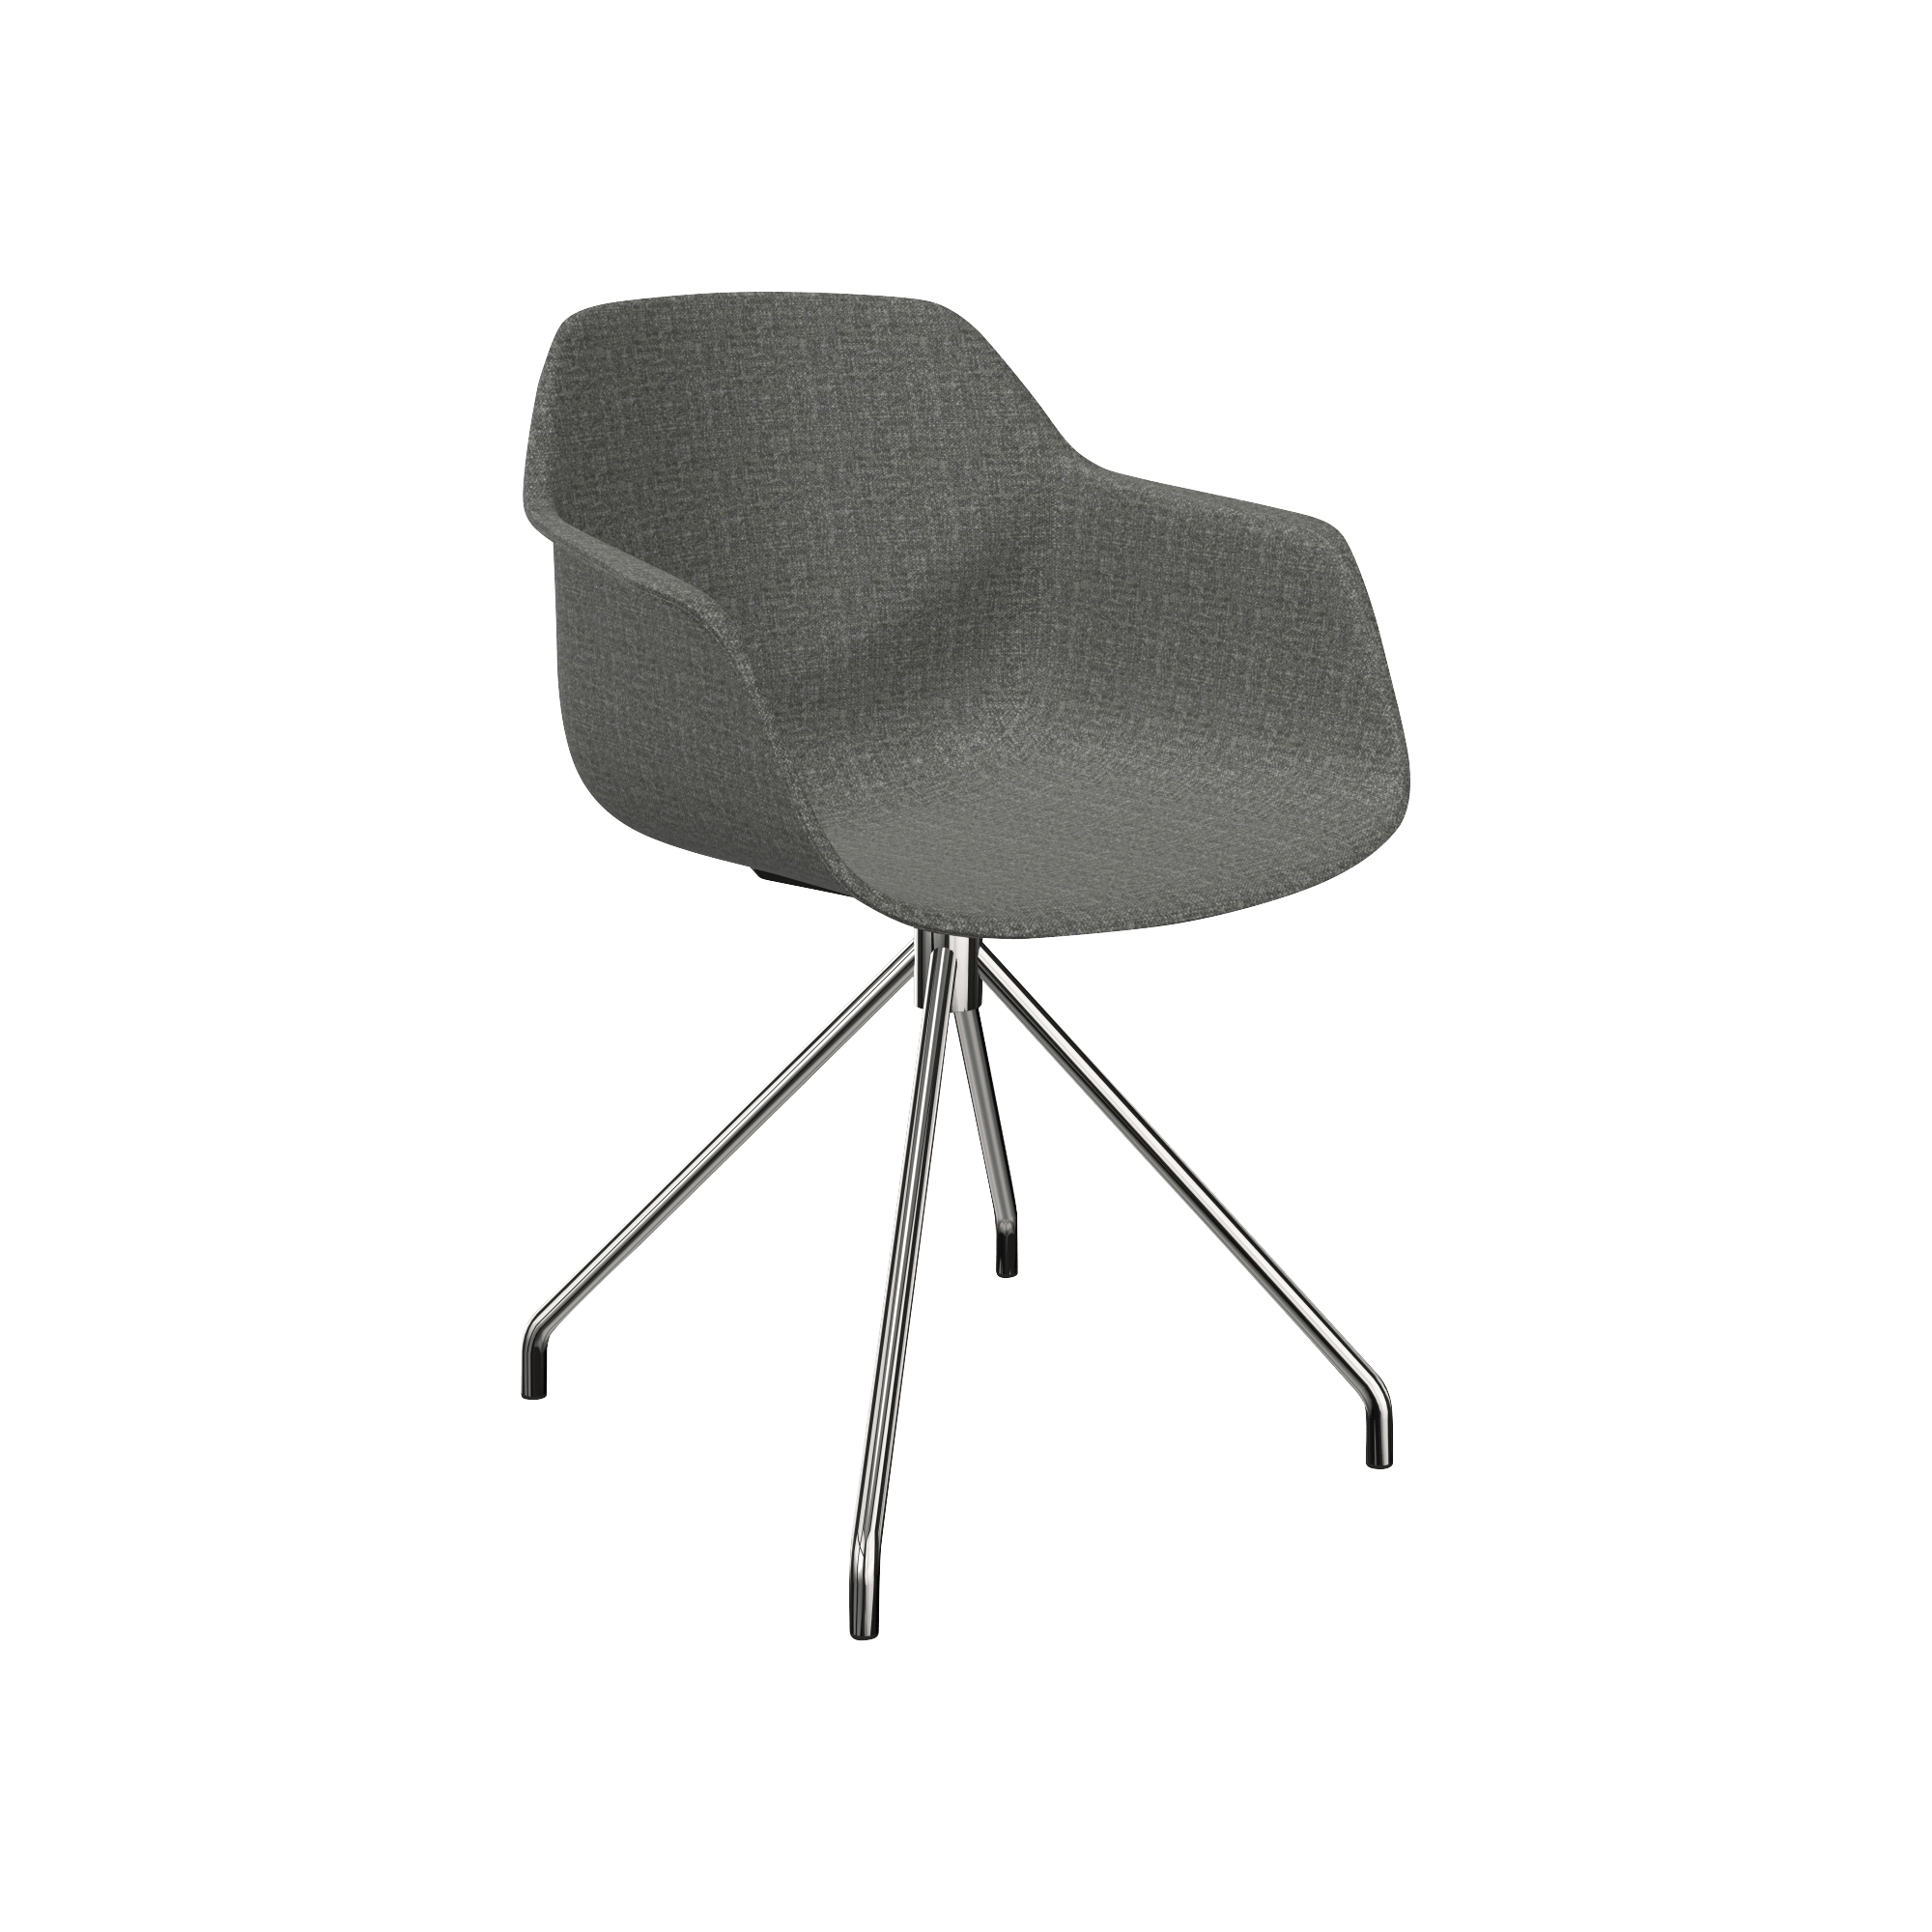 A grey designer desk chair with a metal frame